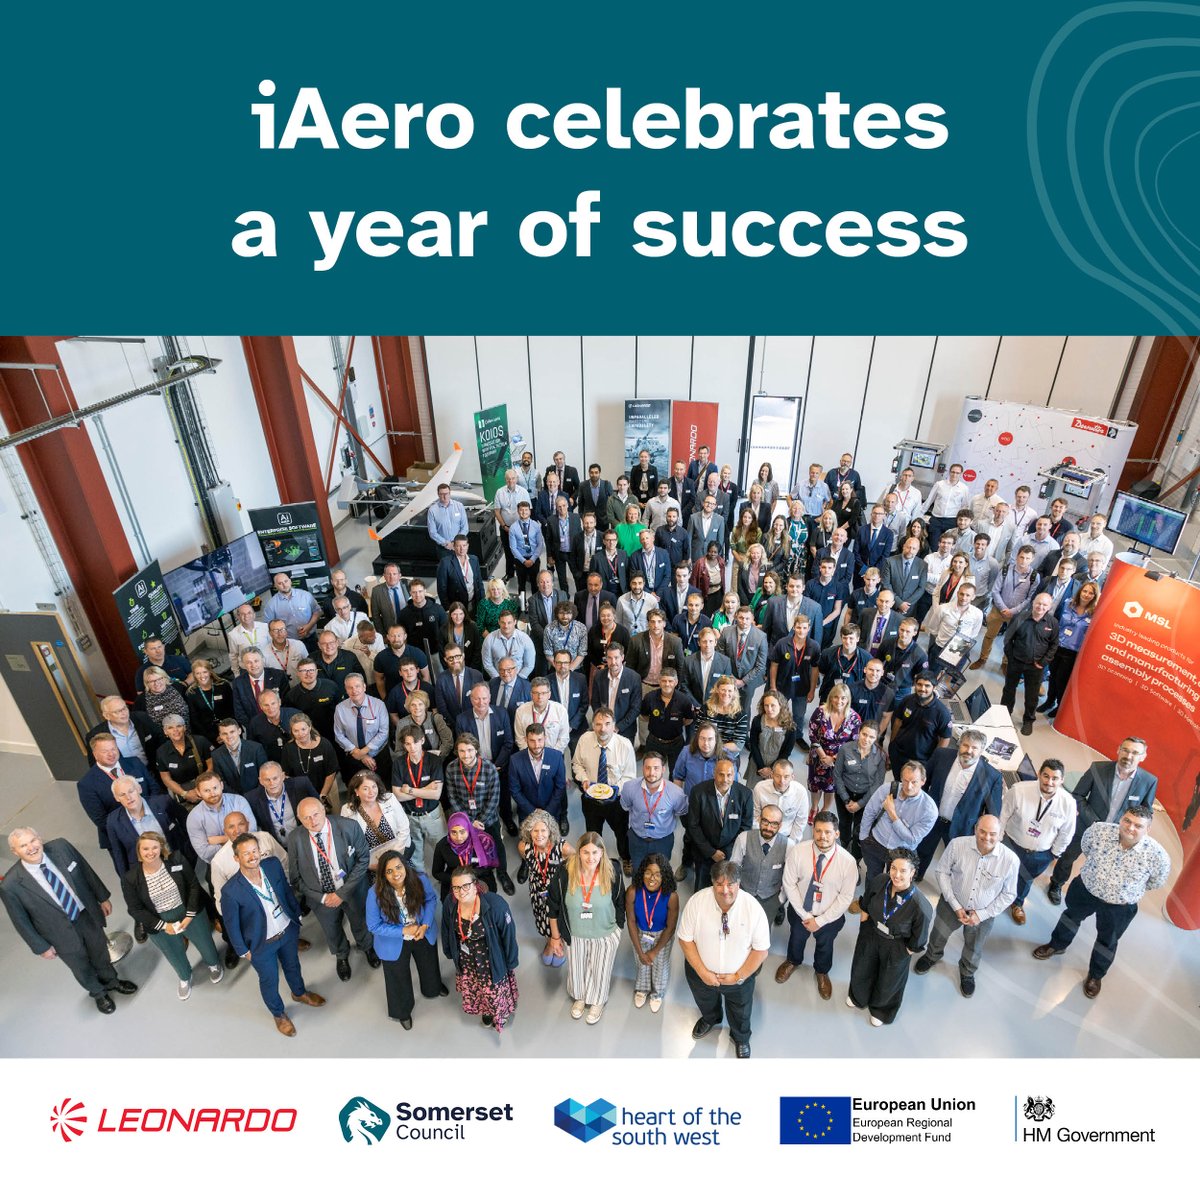 A wide range of industry experts and partners gathered on 8 June to celebrate the hugely successful first year of the iAero aerospace centre in Yeovil. 👉 orlo.uk/5JaZ0

@Leonardo_UK @HeartofSWLEP #innovation #HomeofBritishHelicopters #LivingBetter #Somerset